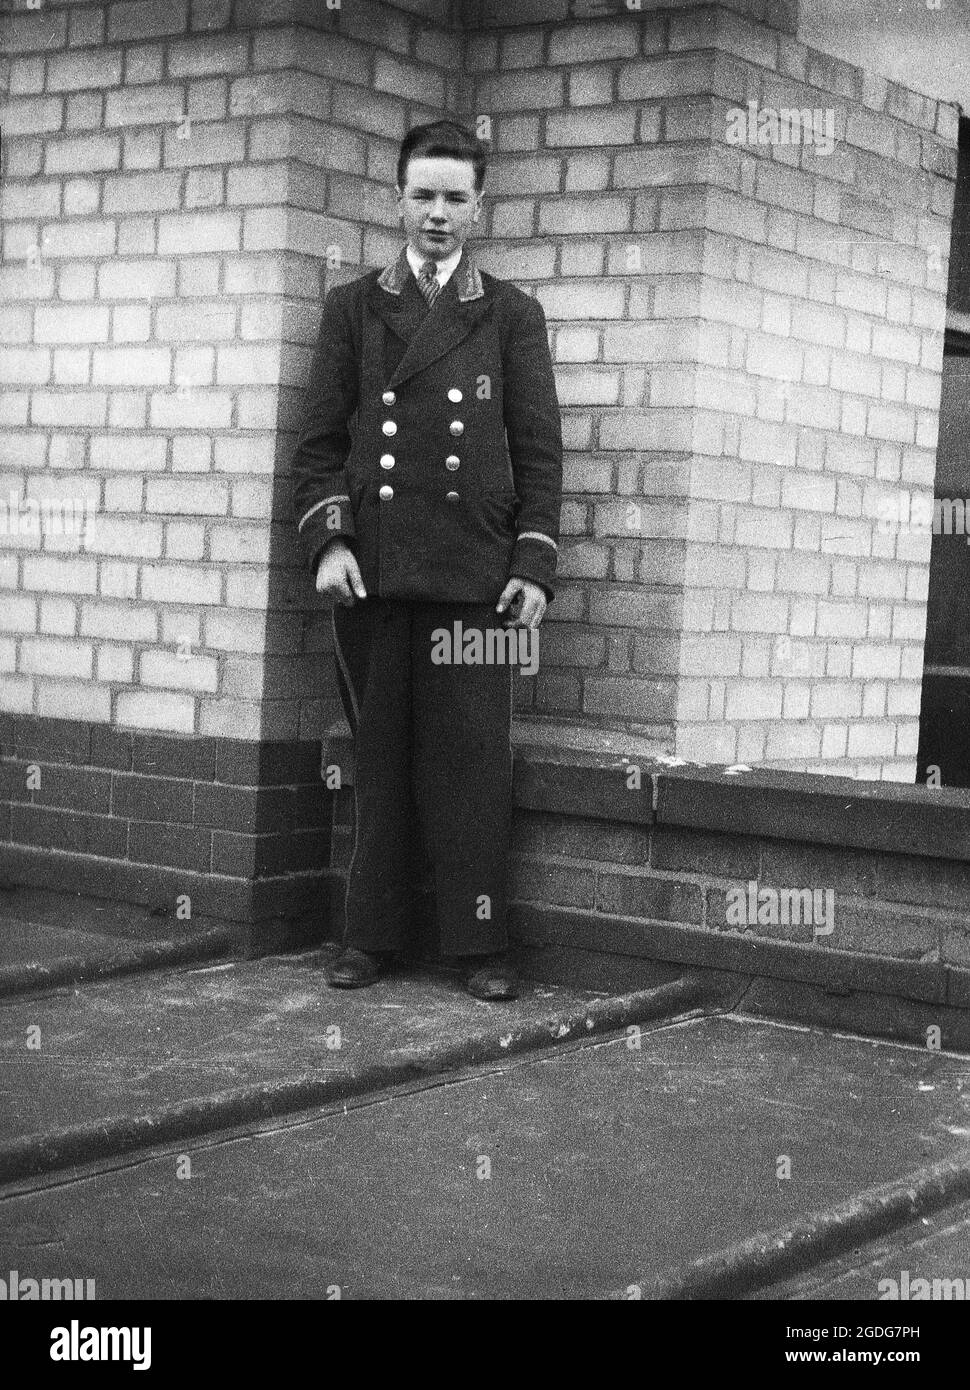 1940s, historical, hotel bell boy in his uniform standing on a flat roofed area of the hotel, London, England, UK. Traditionally, the young man would act as an attendant or porter, helping guests with their luggage and run general errands. Also known as a bellhop. Stock Photo